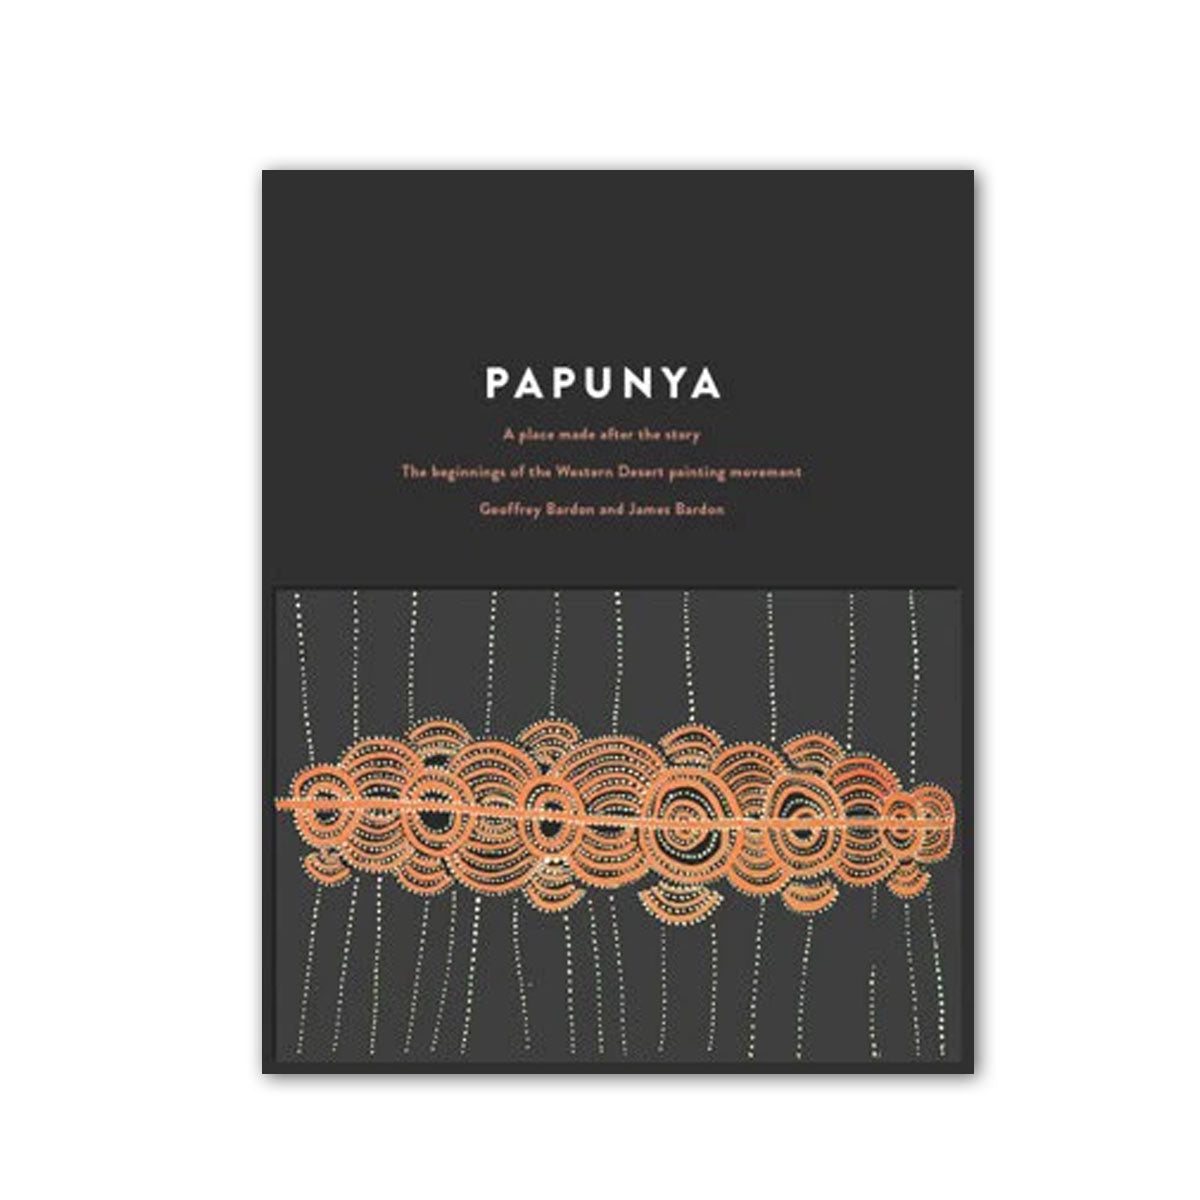 Papunya -A Place Made After the Story